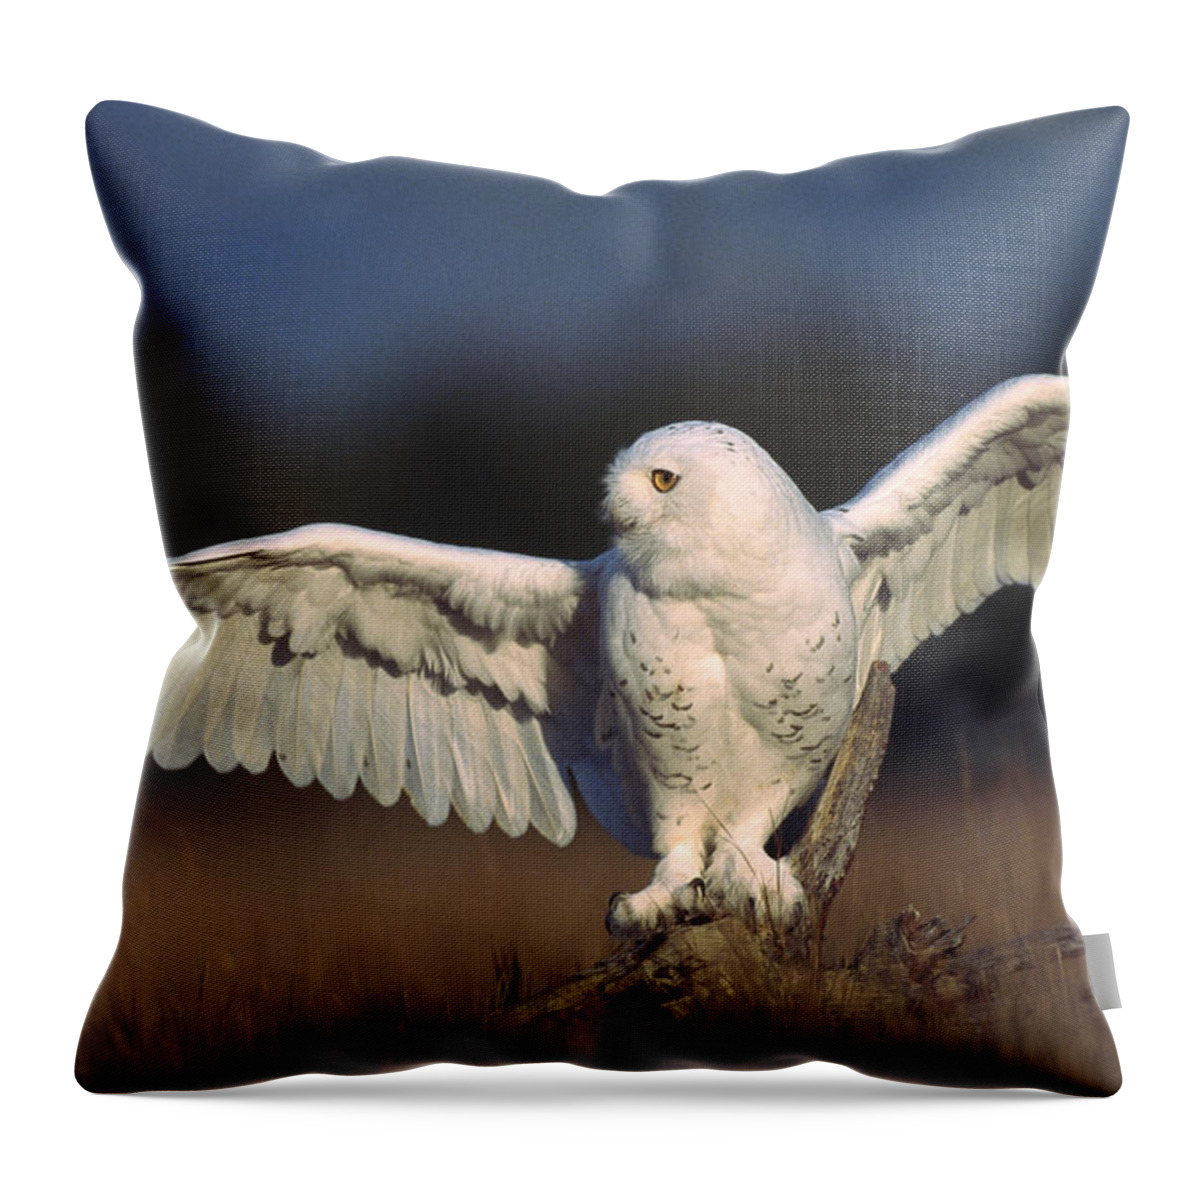 00170062 Throw Pillow featuring the photograph Snowy Owl Adult Balancing On A Stump by Tim Fitzharris